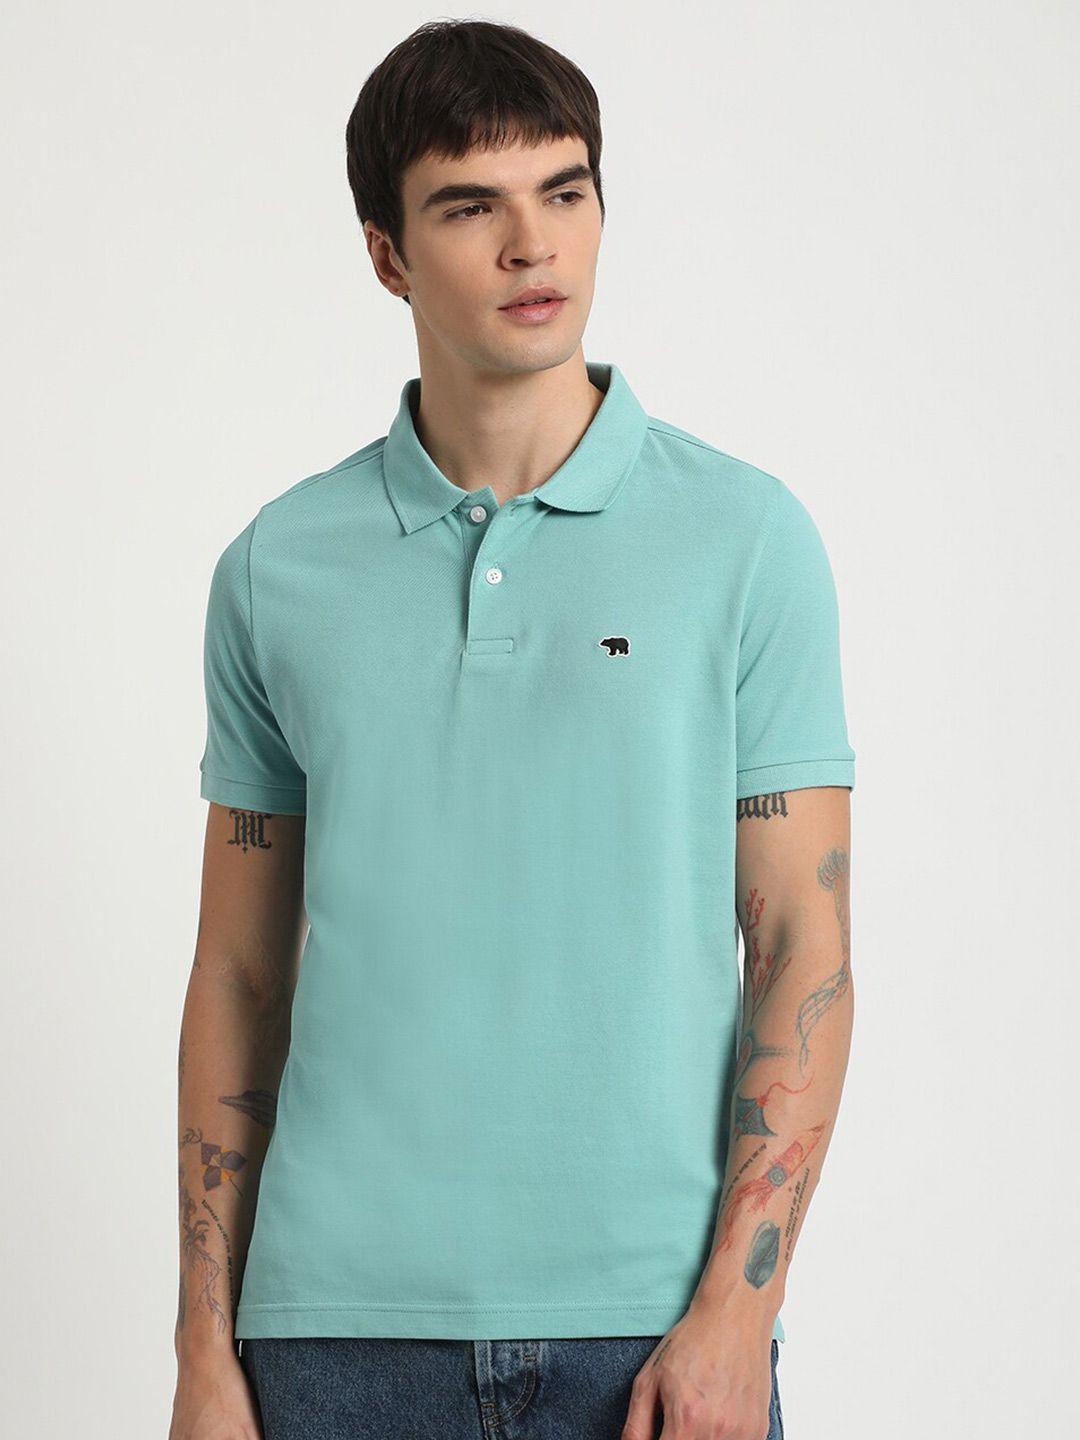 the-bear-house-polo-collar-slim-fit-pure-cotton-t-shirt